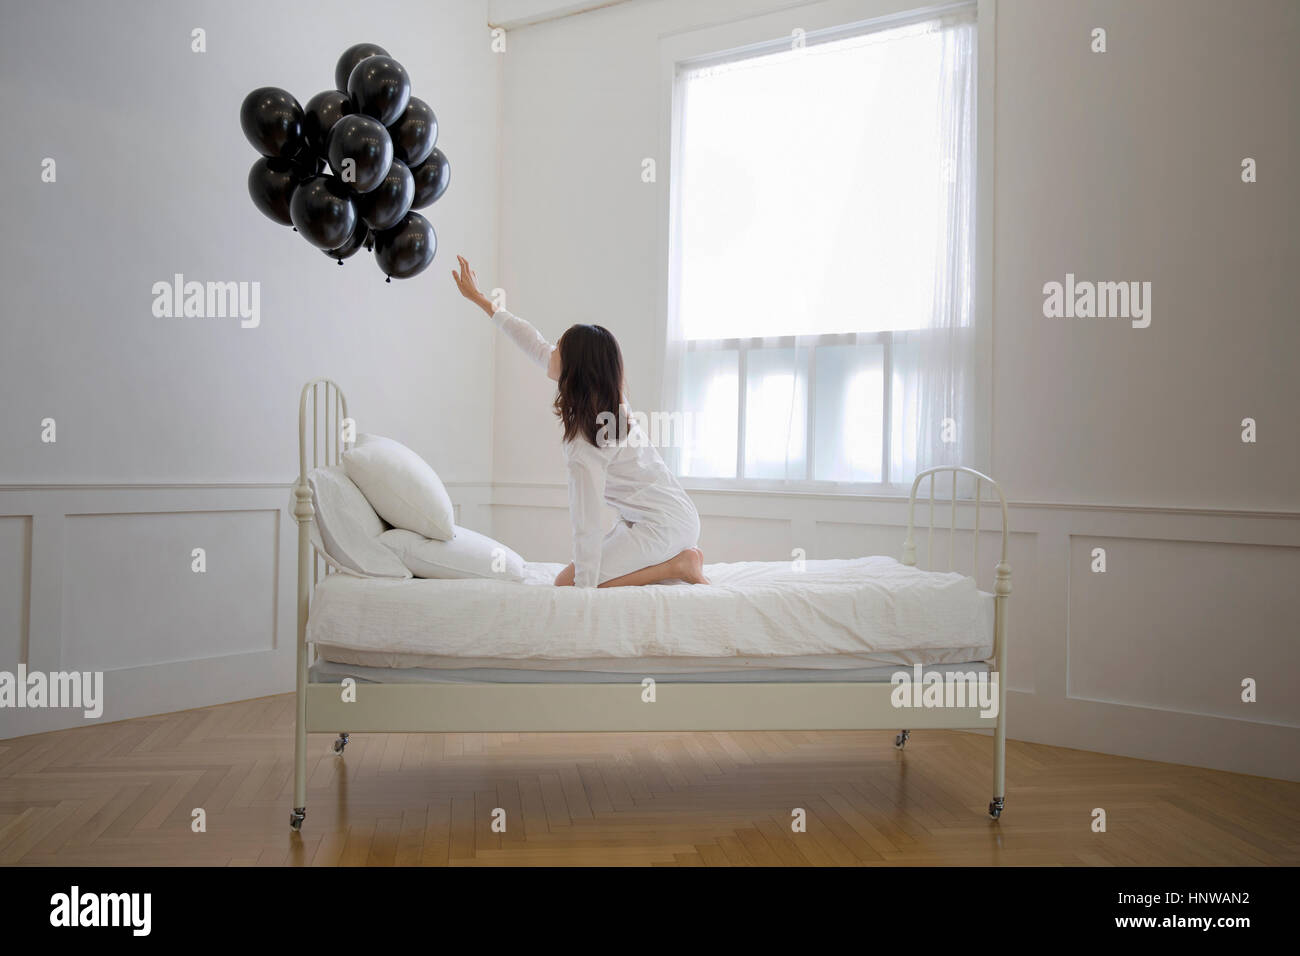 Young woman in bed reaching for black balloons Stock Photo